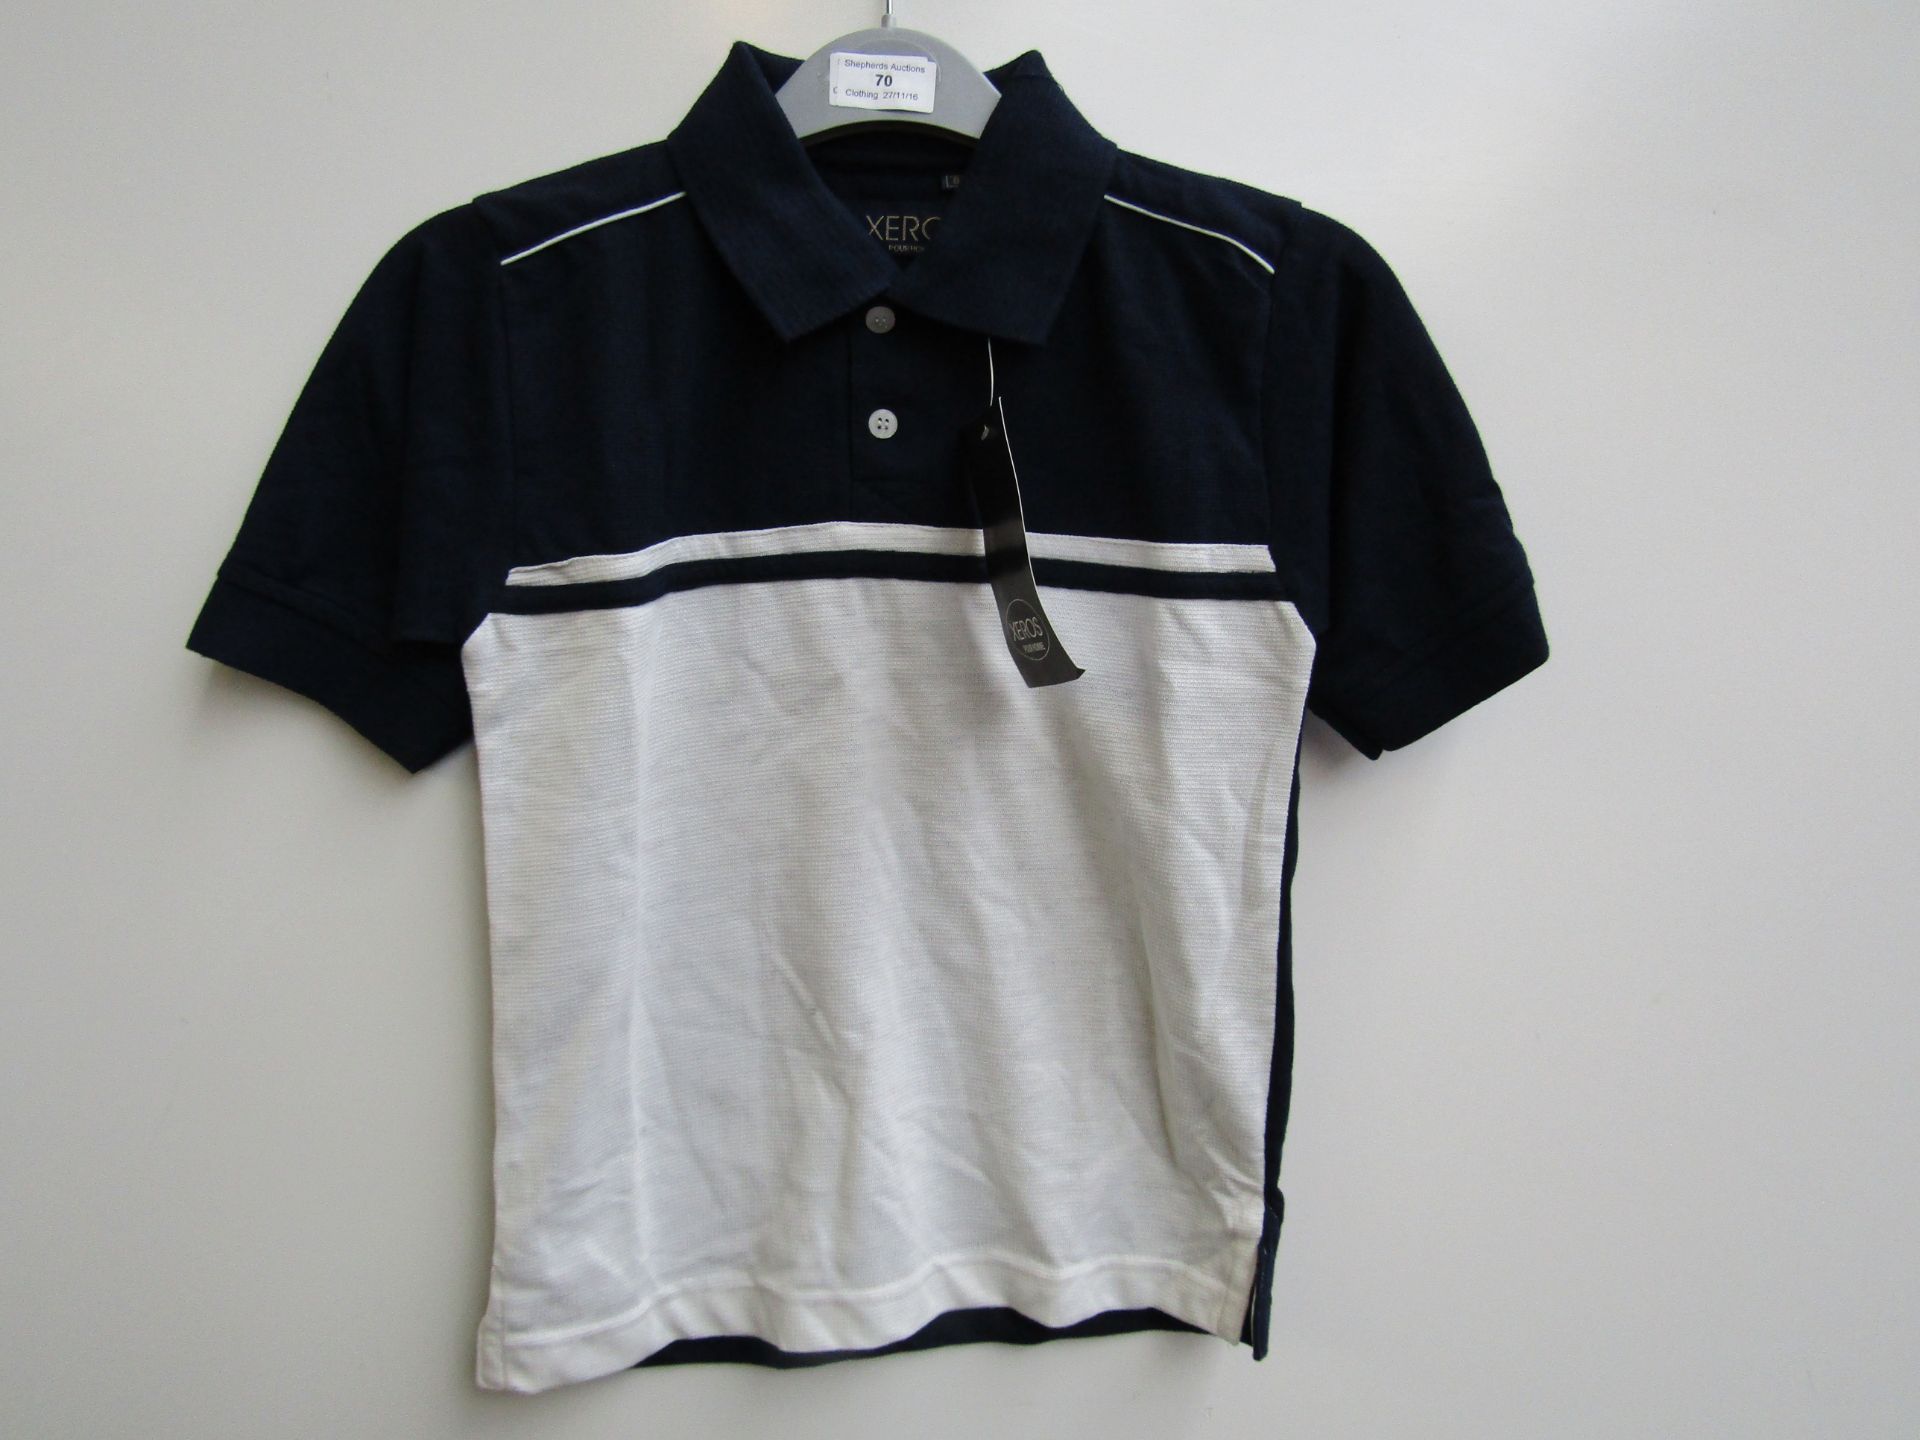 Childs Xeros Polo Shirt, new with tag, Size Small